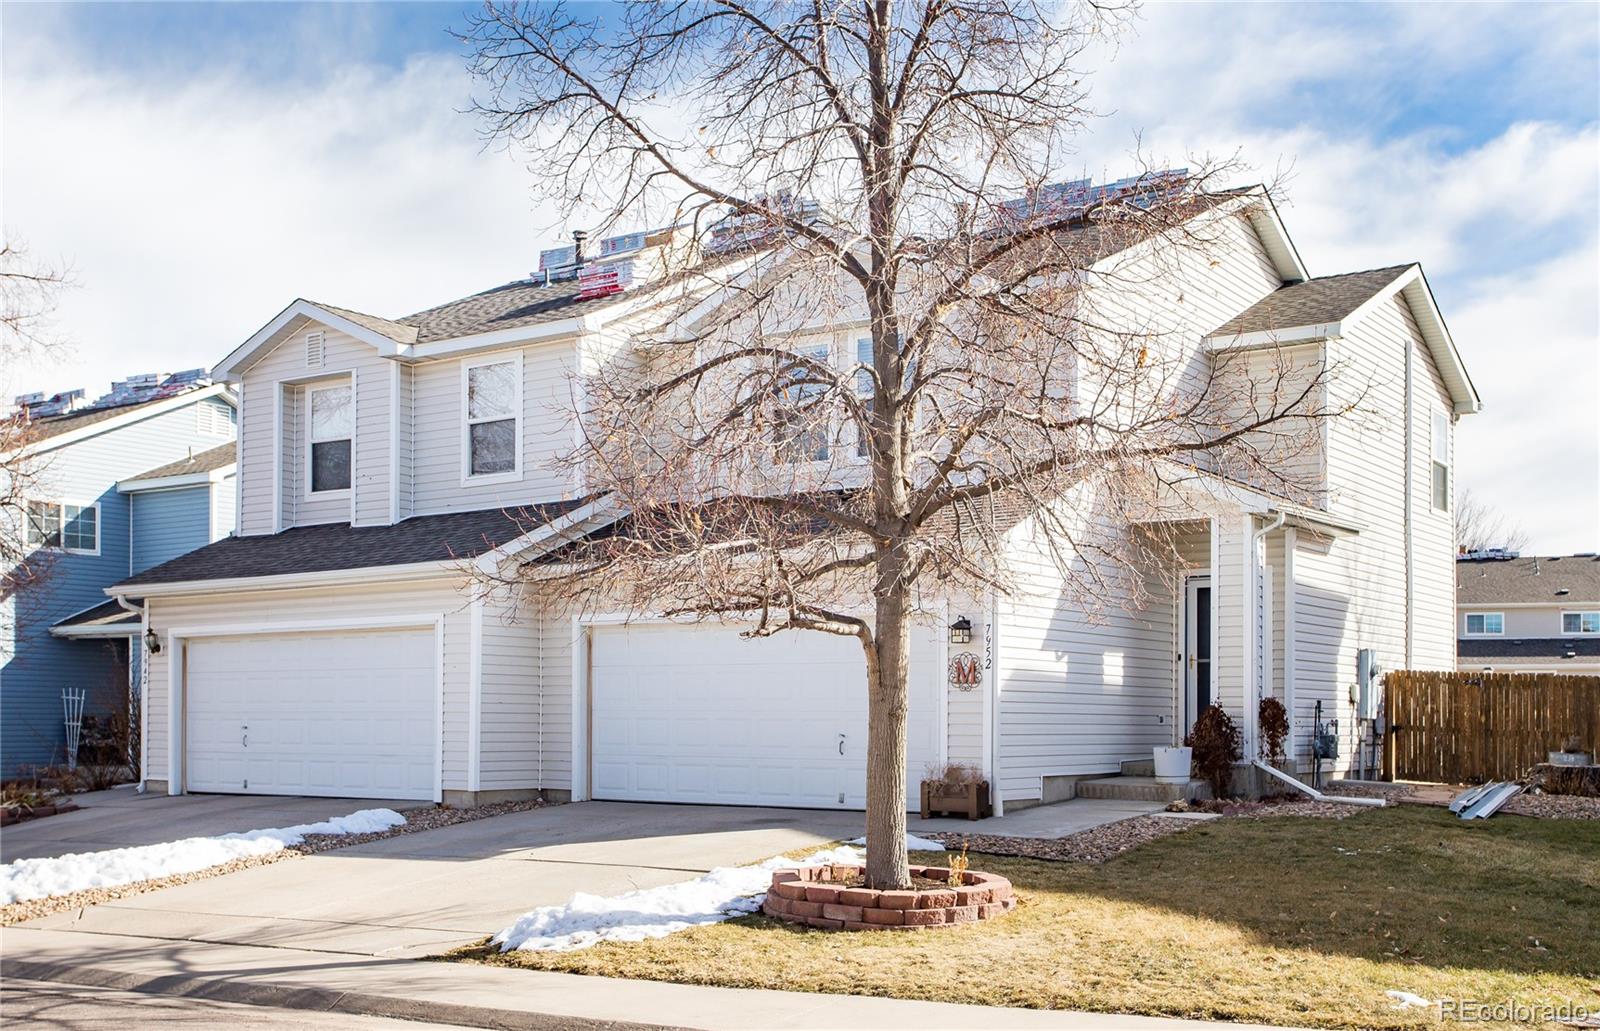 7952 s kalispell way, Englewood sold home. Closed on 2024-04-05 for $490,000.